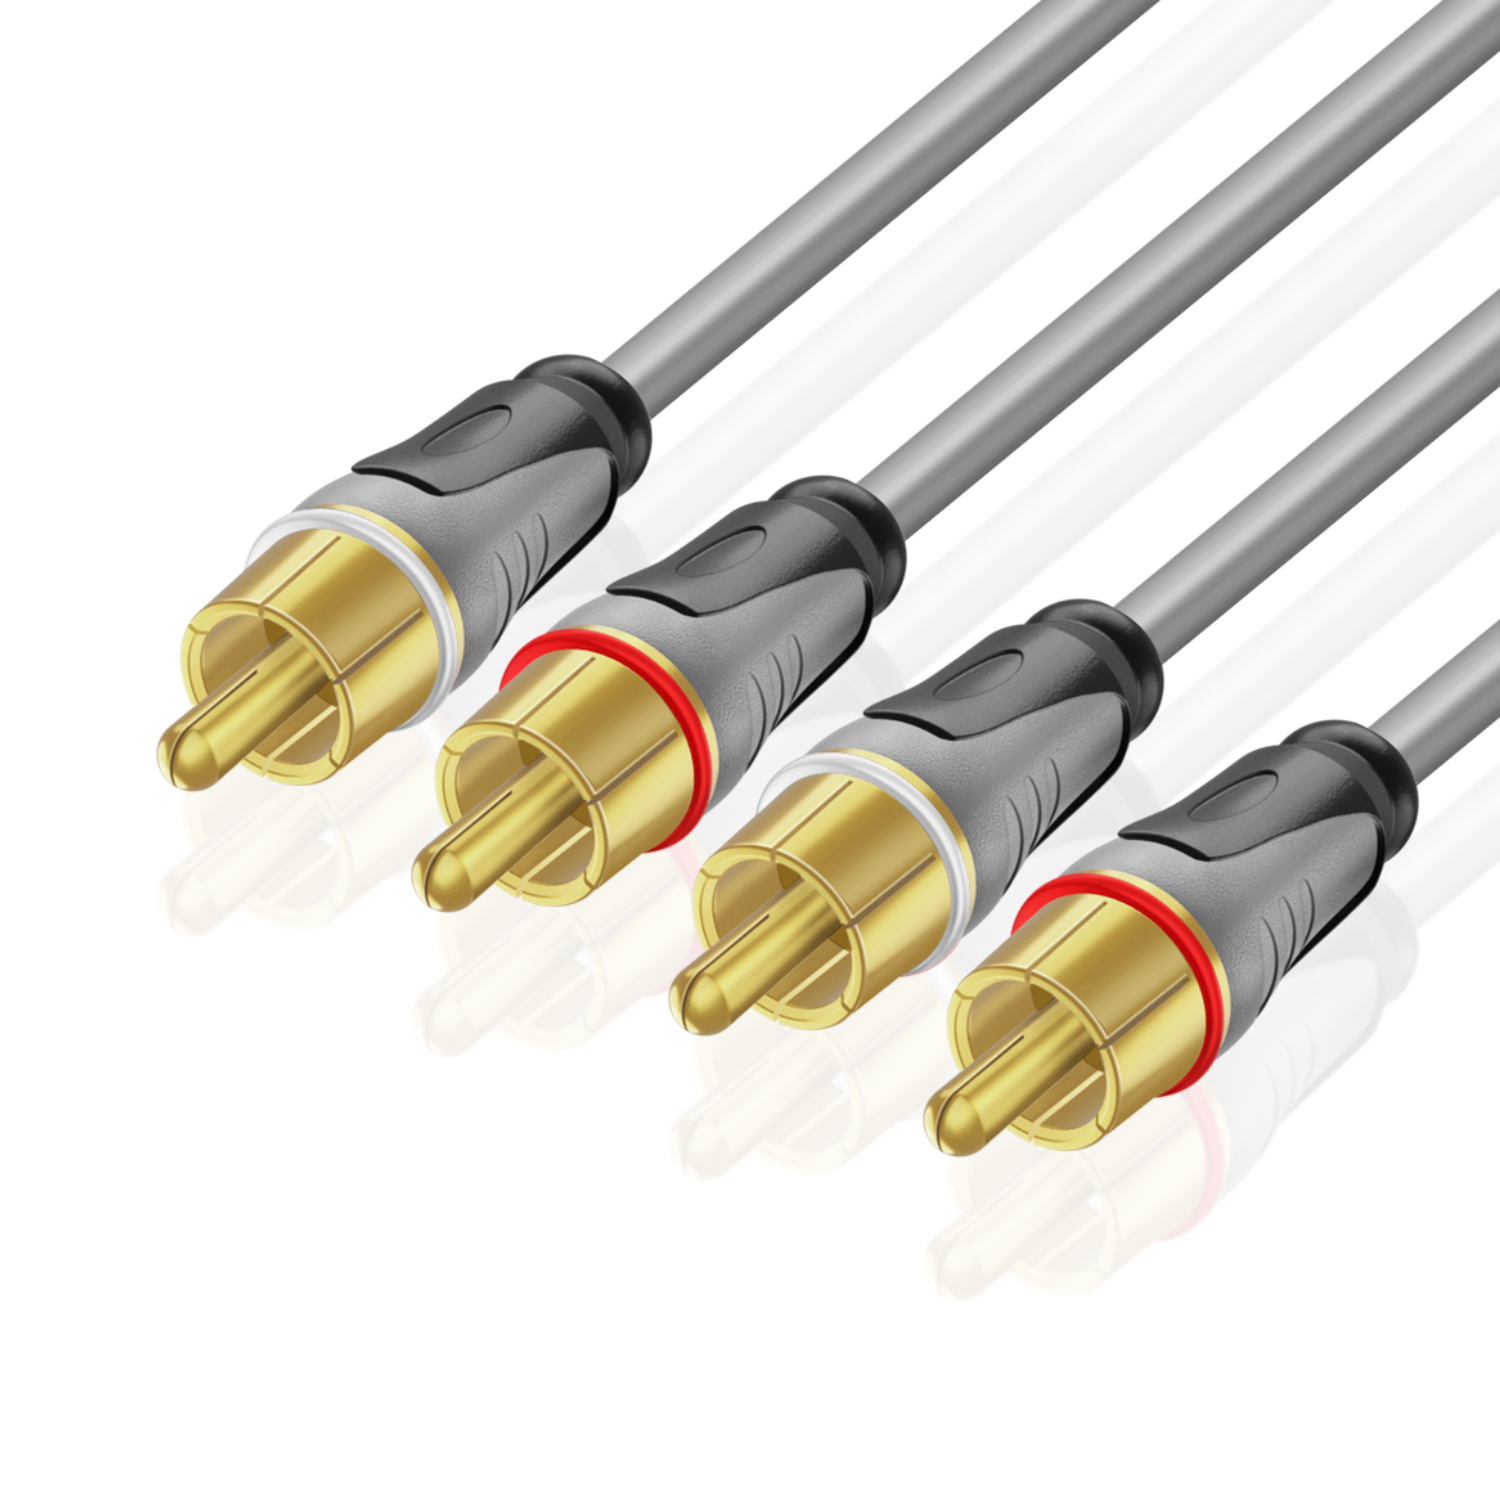 RCA Cable - 2RCA Male to 2RCA Male with Dual Shielded RCA Audio Cable - 2 Channel RCA Male to Male Stereo Connector, Gold Plated RCA Cables 50ft for Amplifiers, Car Audio, Home Theater, Speakers - image 1 of 6